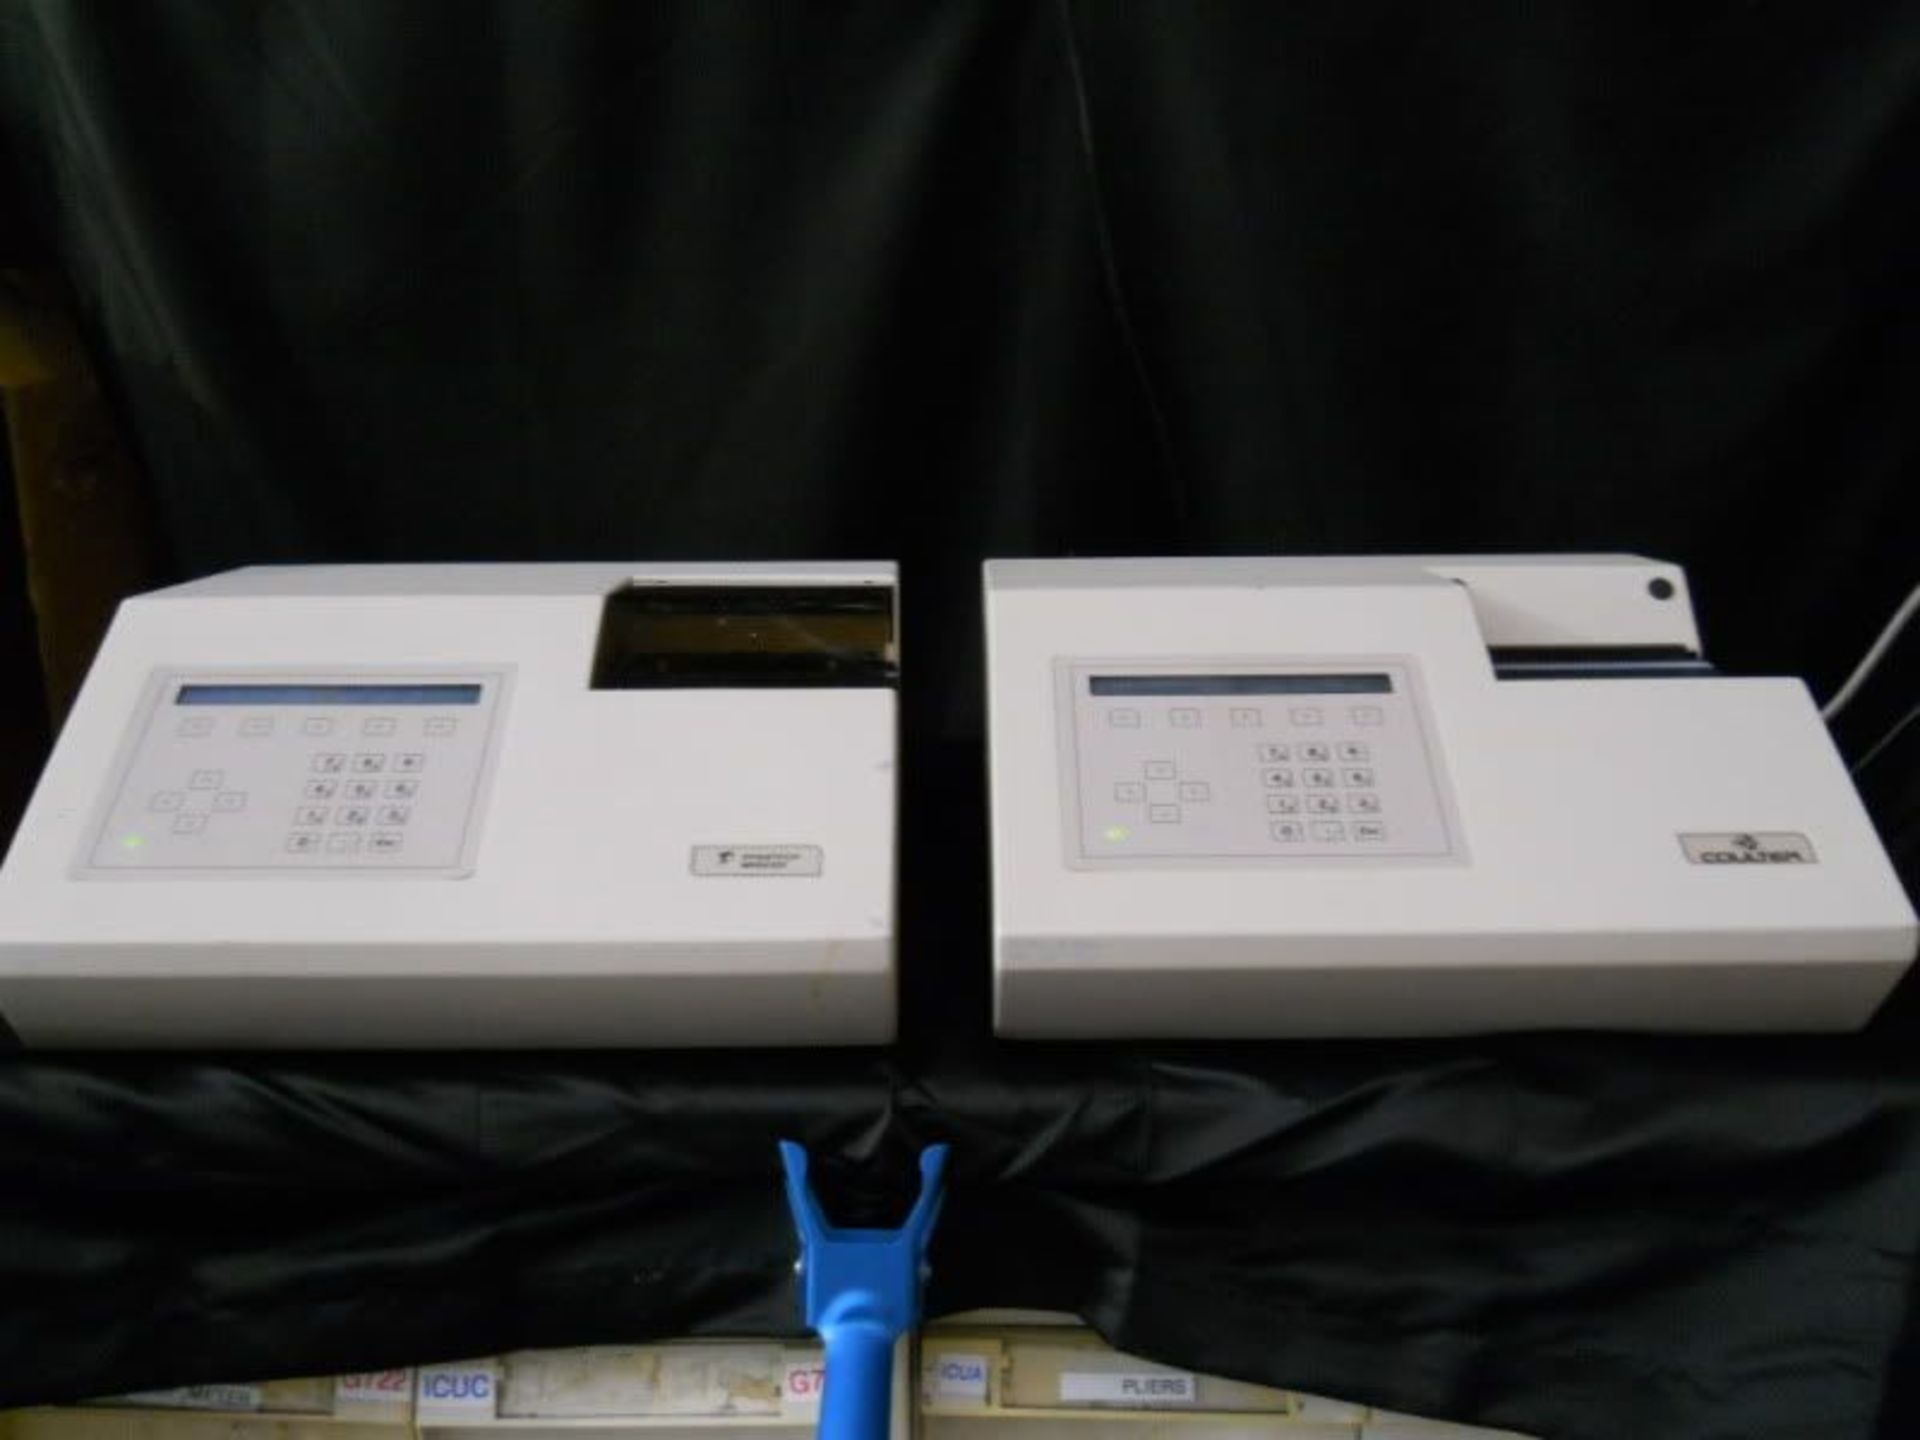 Lot of 2 Dynatech MR5000 Microplate Readers (Parts Not Working), Qty 1, 221094217837